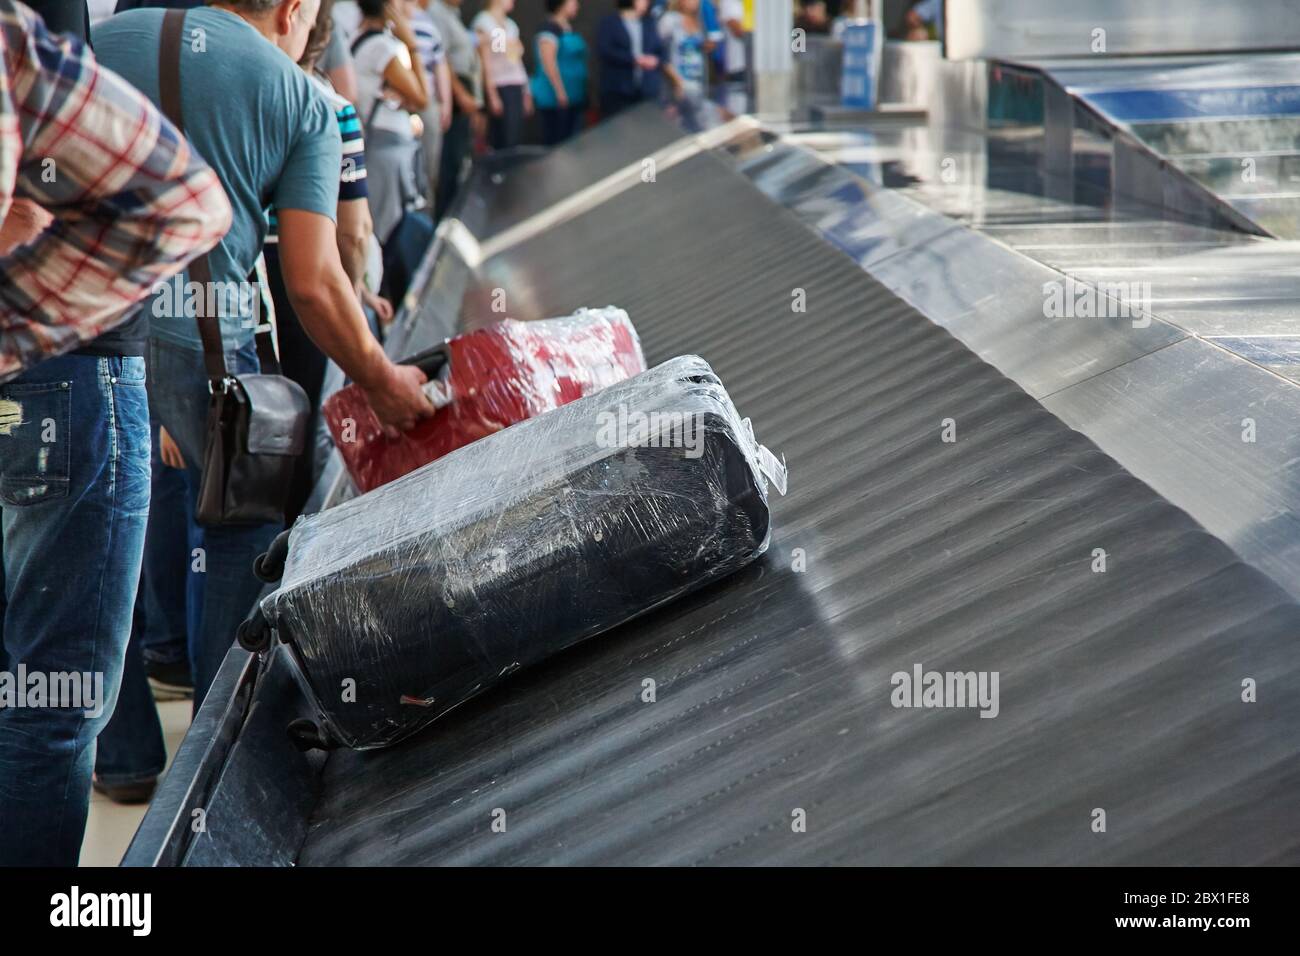 moving conveyor belt with suitcases at baggage claim at airport. Stock Photo